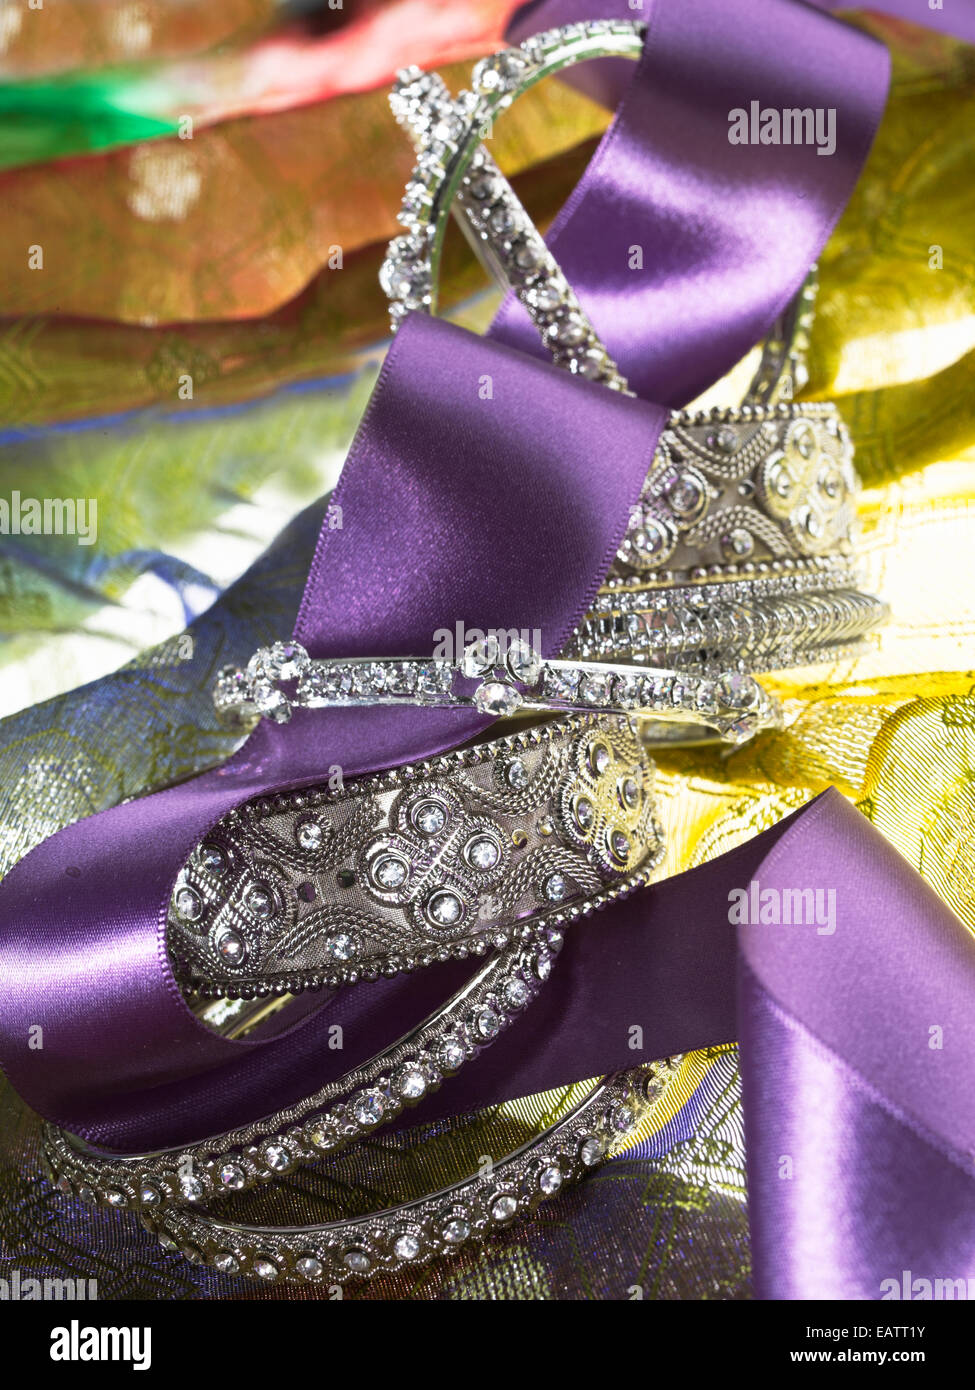 silver ornate bangle bracelets stacked with a decorative purple ribbon on a yellow green background Stock Photo